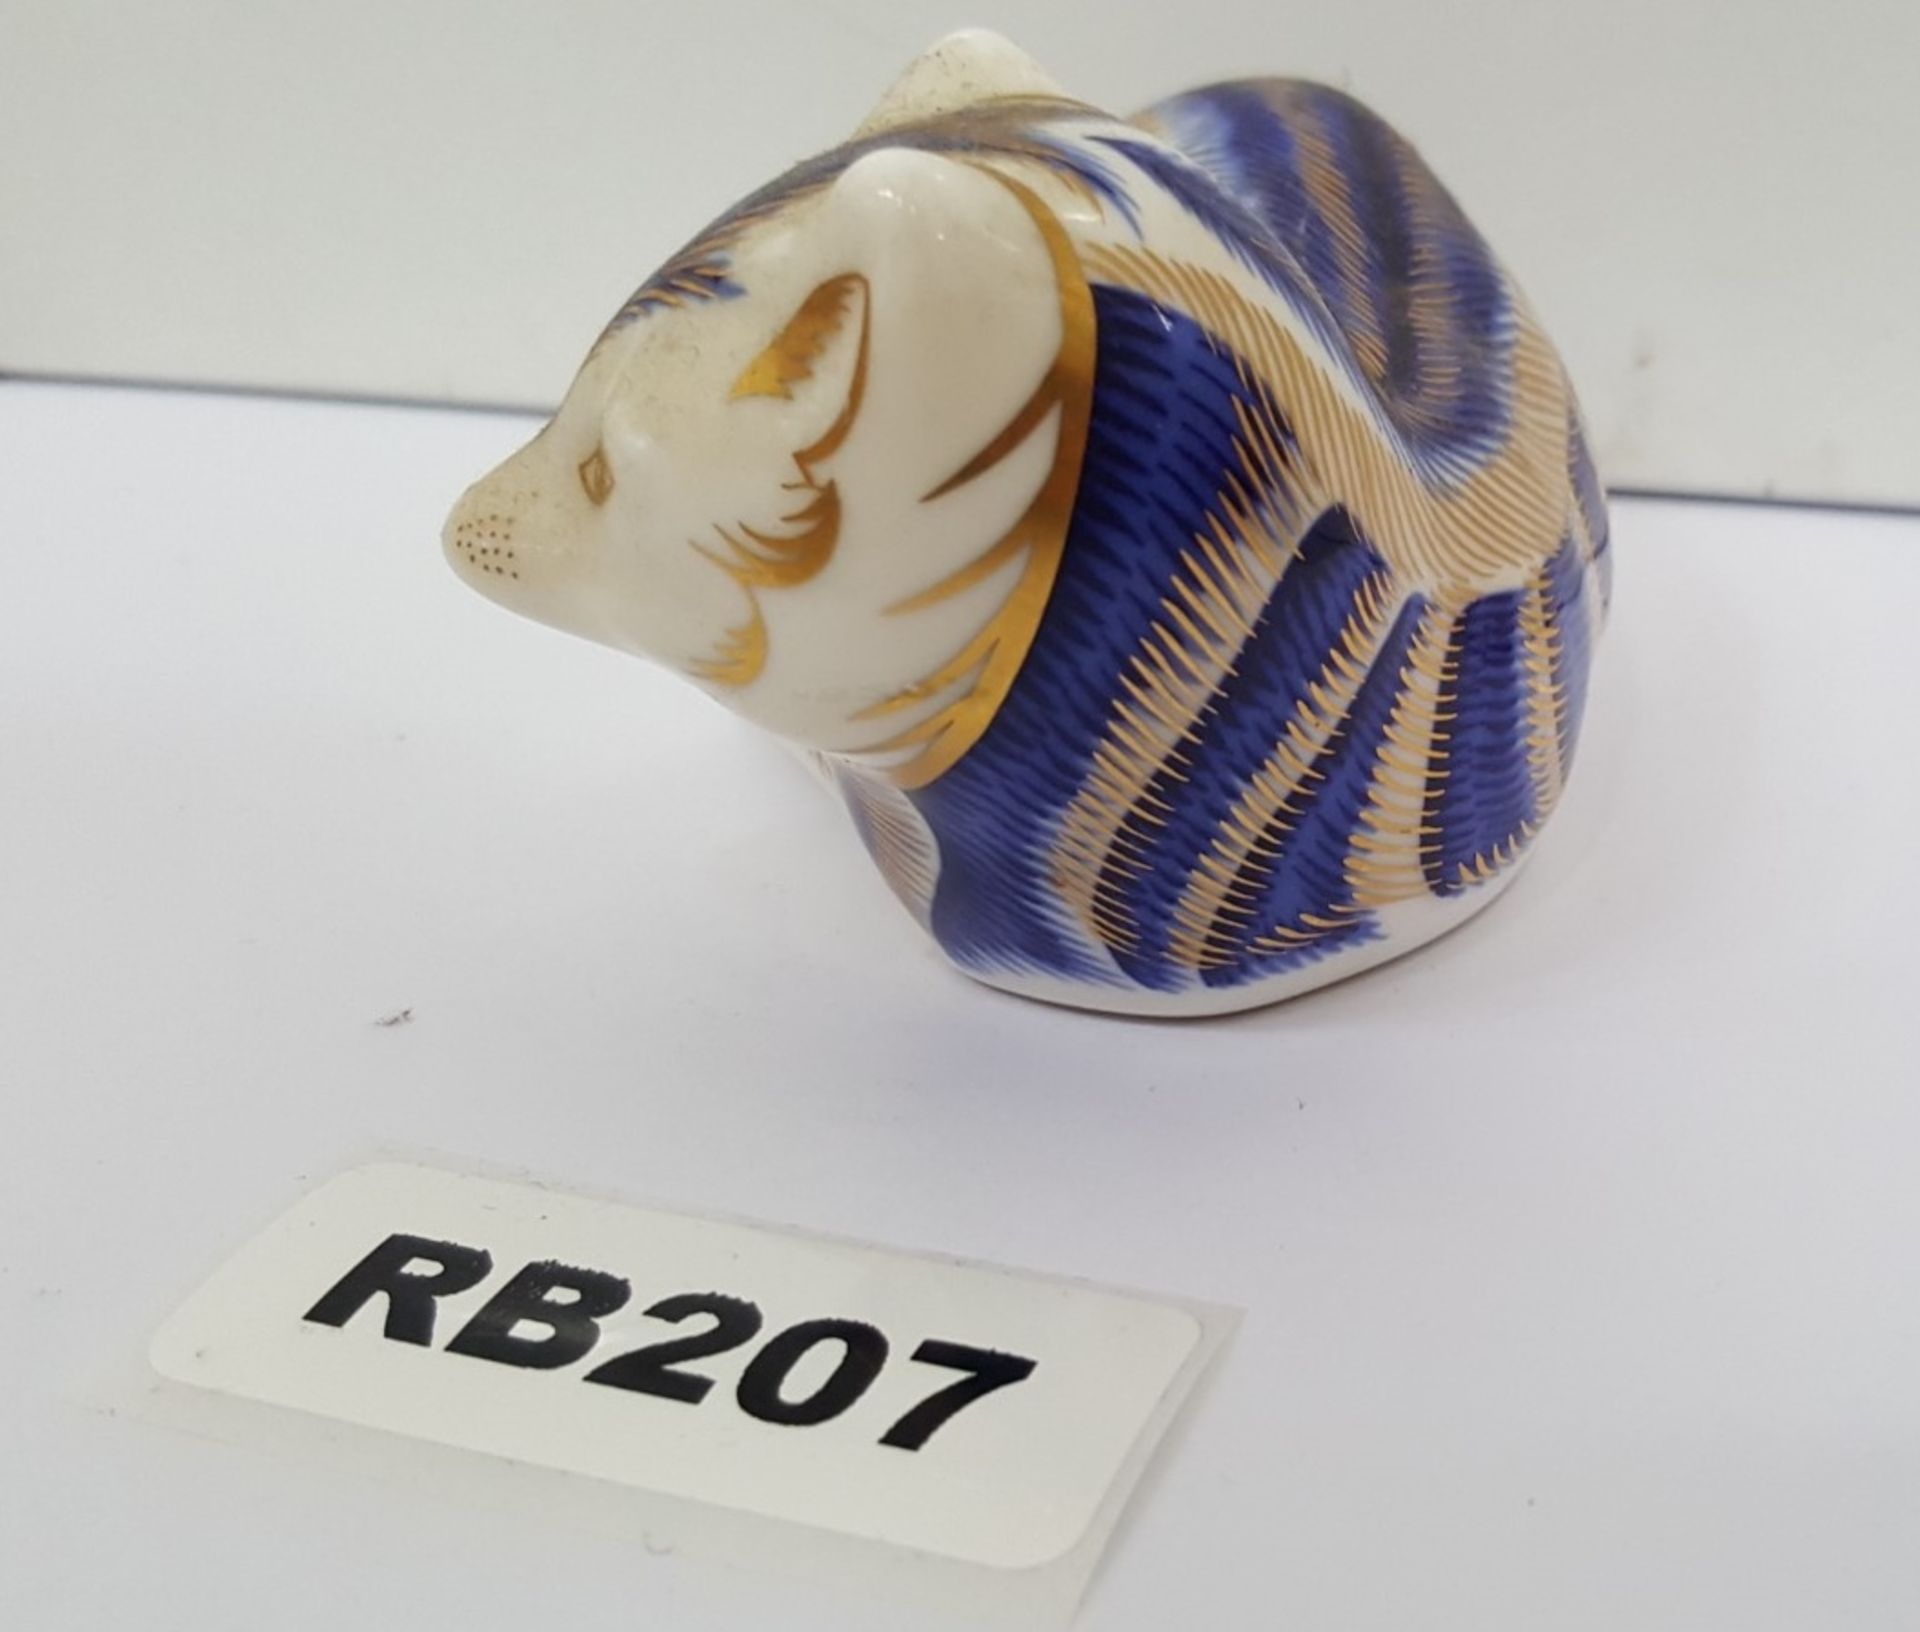 1 x Collectible Royal Crown Derby Paperweight Fox - Ref RB207 I - Image 4 of 5